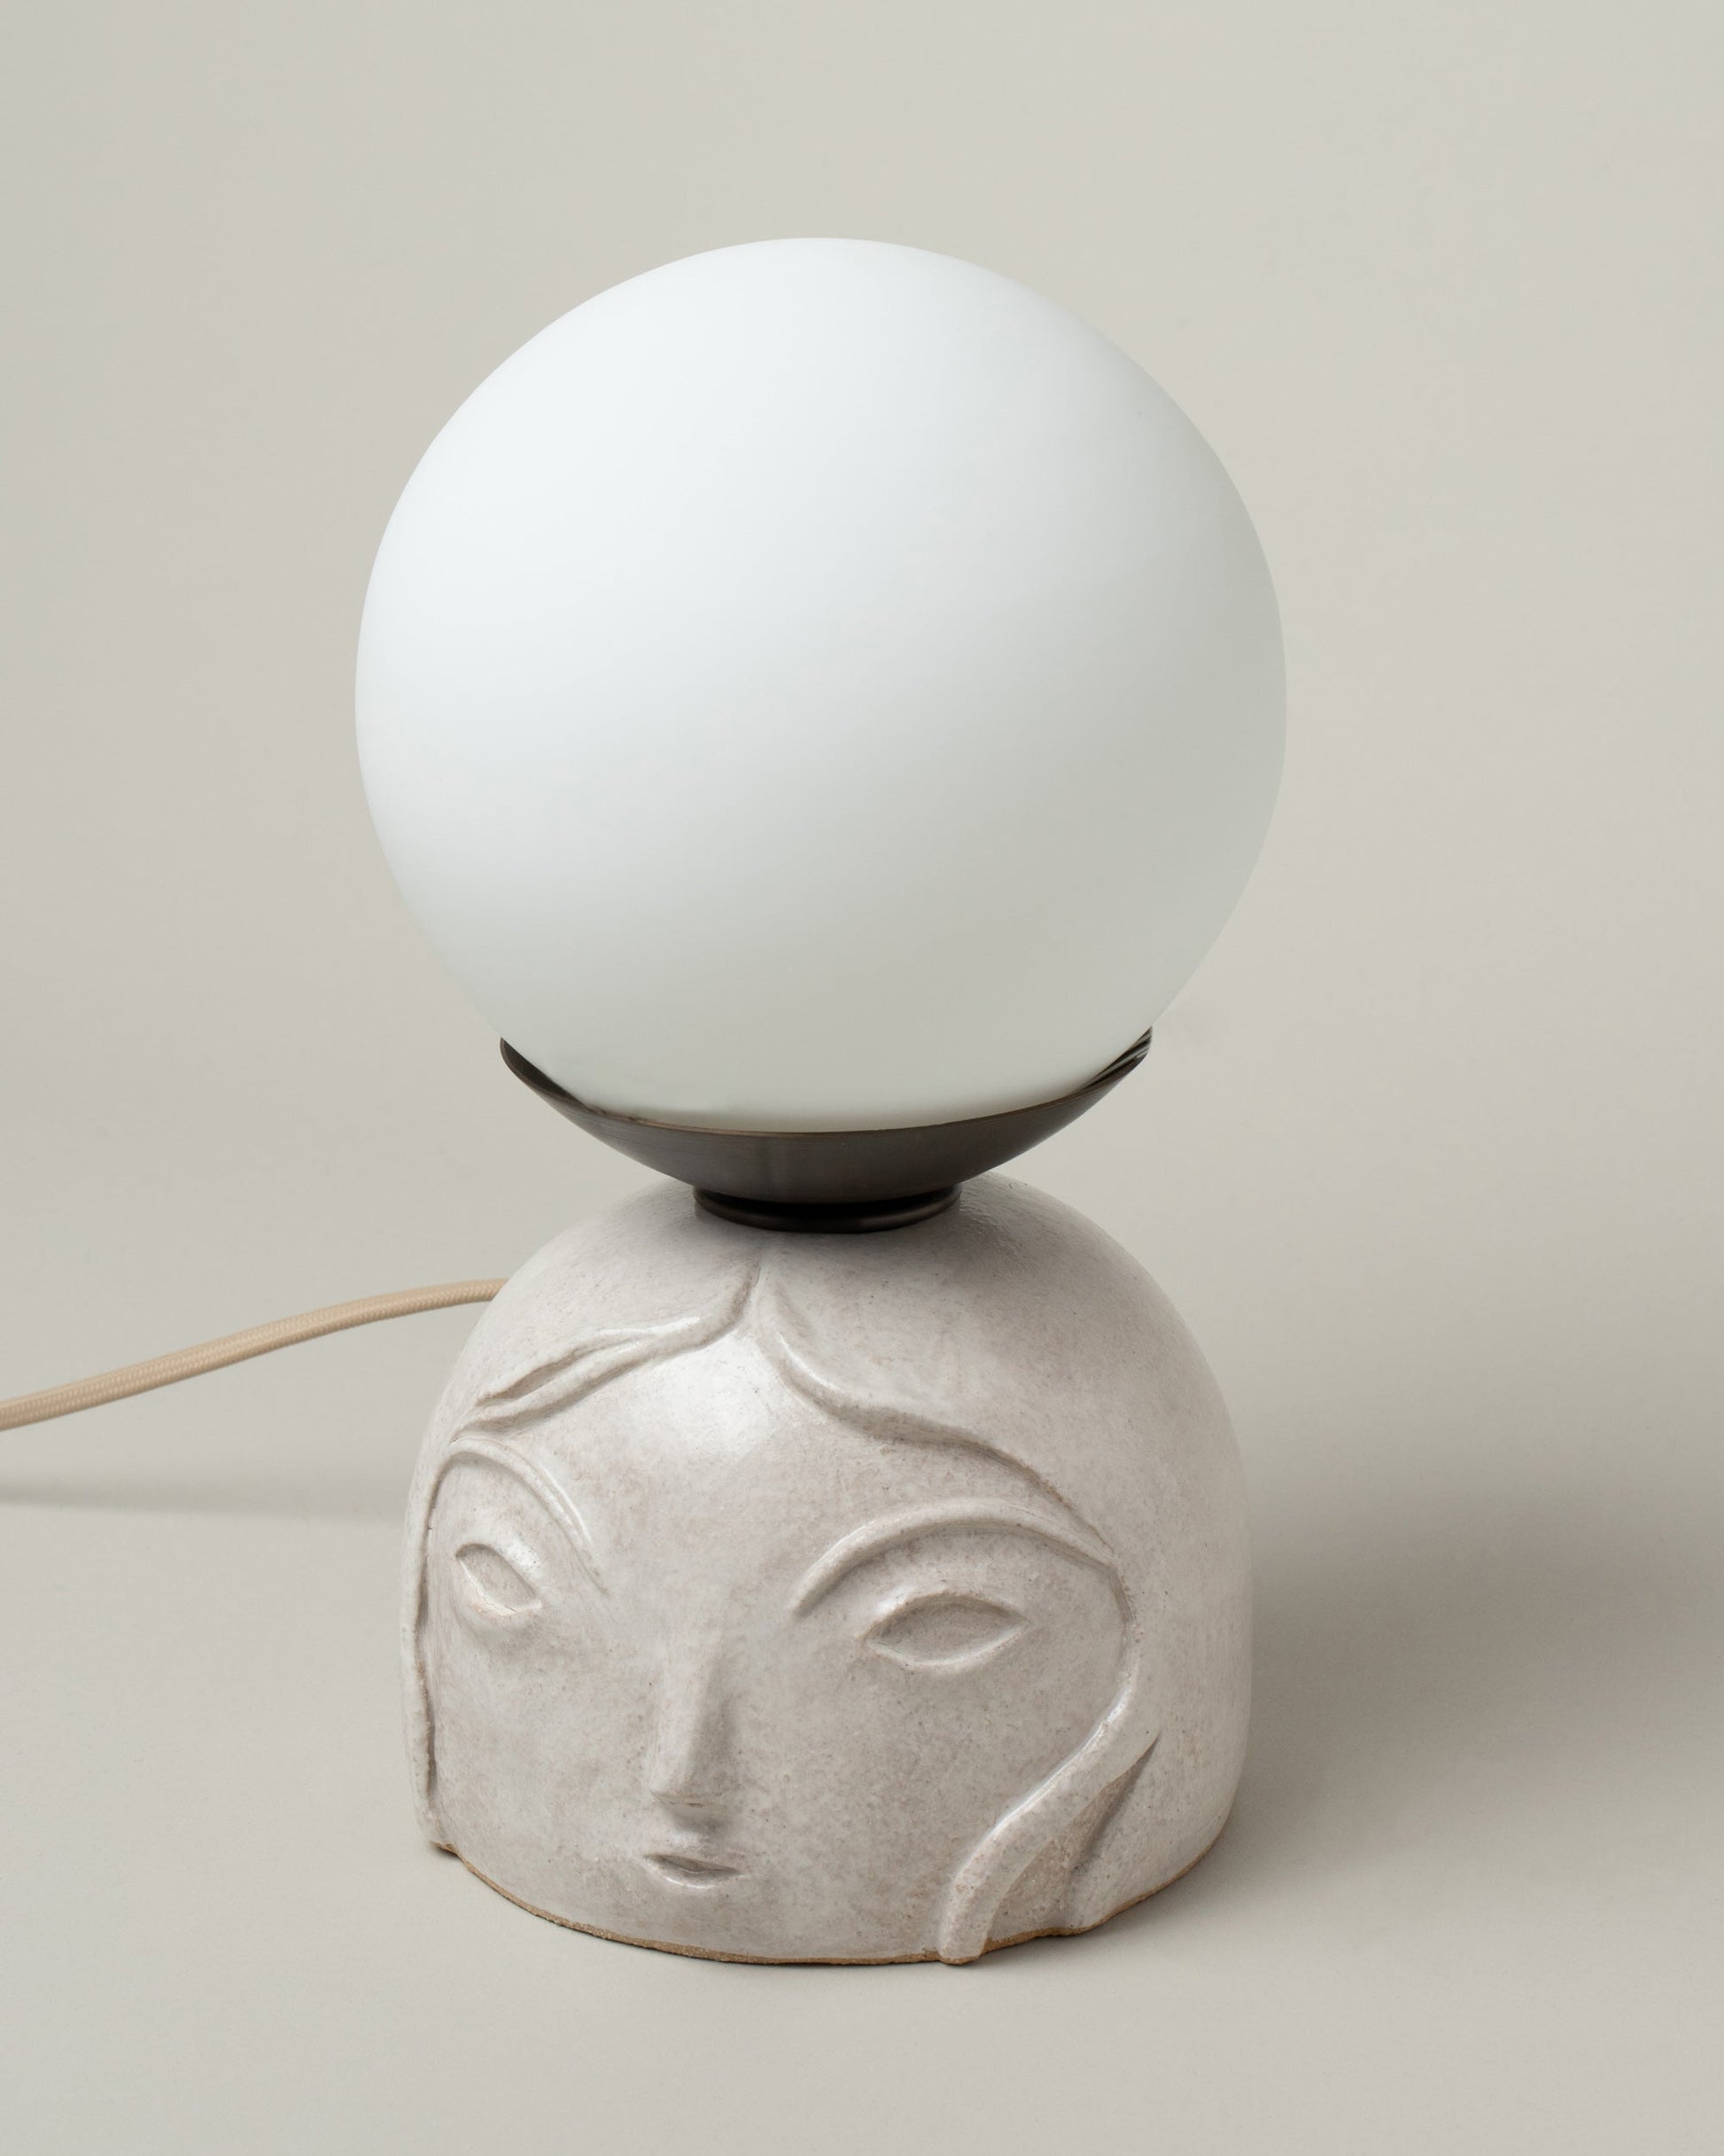 Rami Kim Small / White Floating Penelope Table Lamp on light color background.